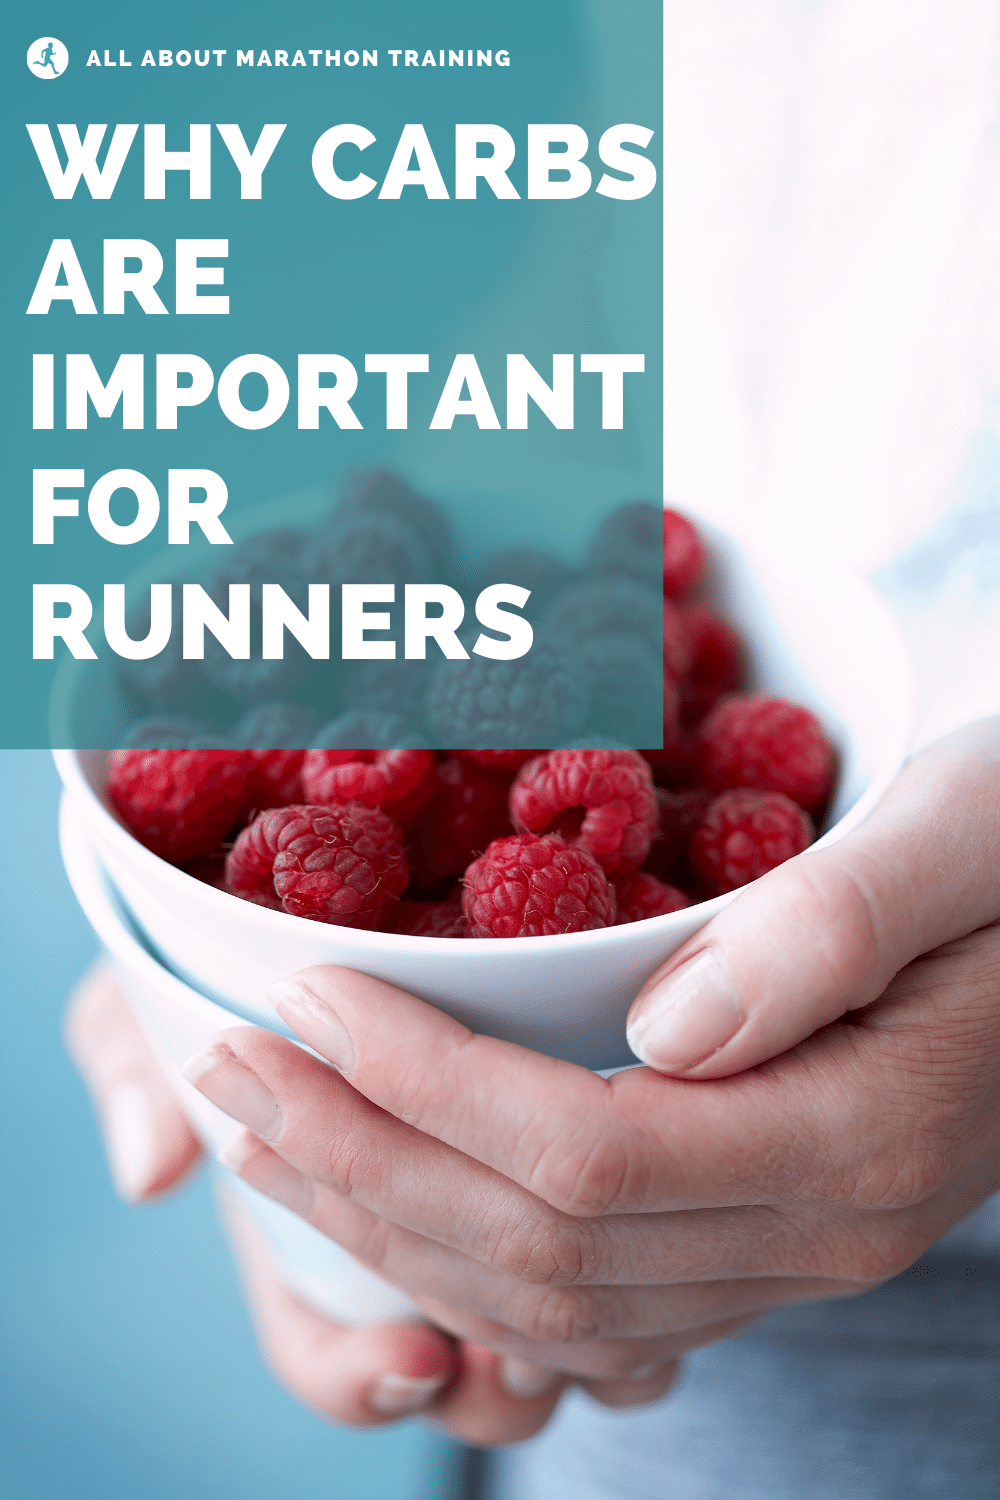 CarbohydratesForRunnersAltPIN.png